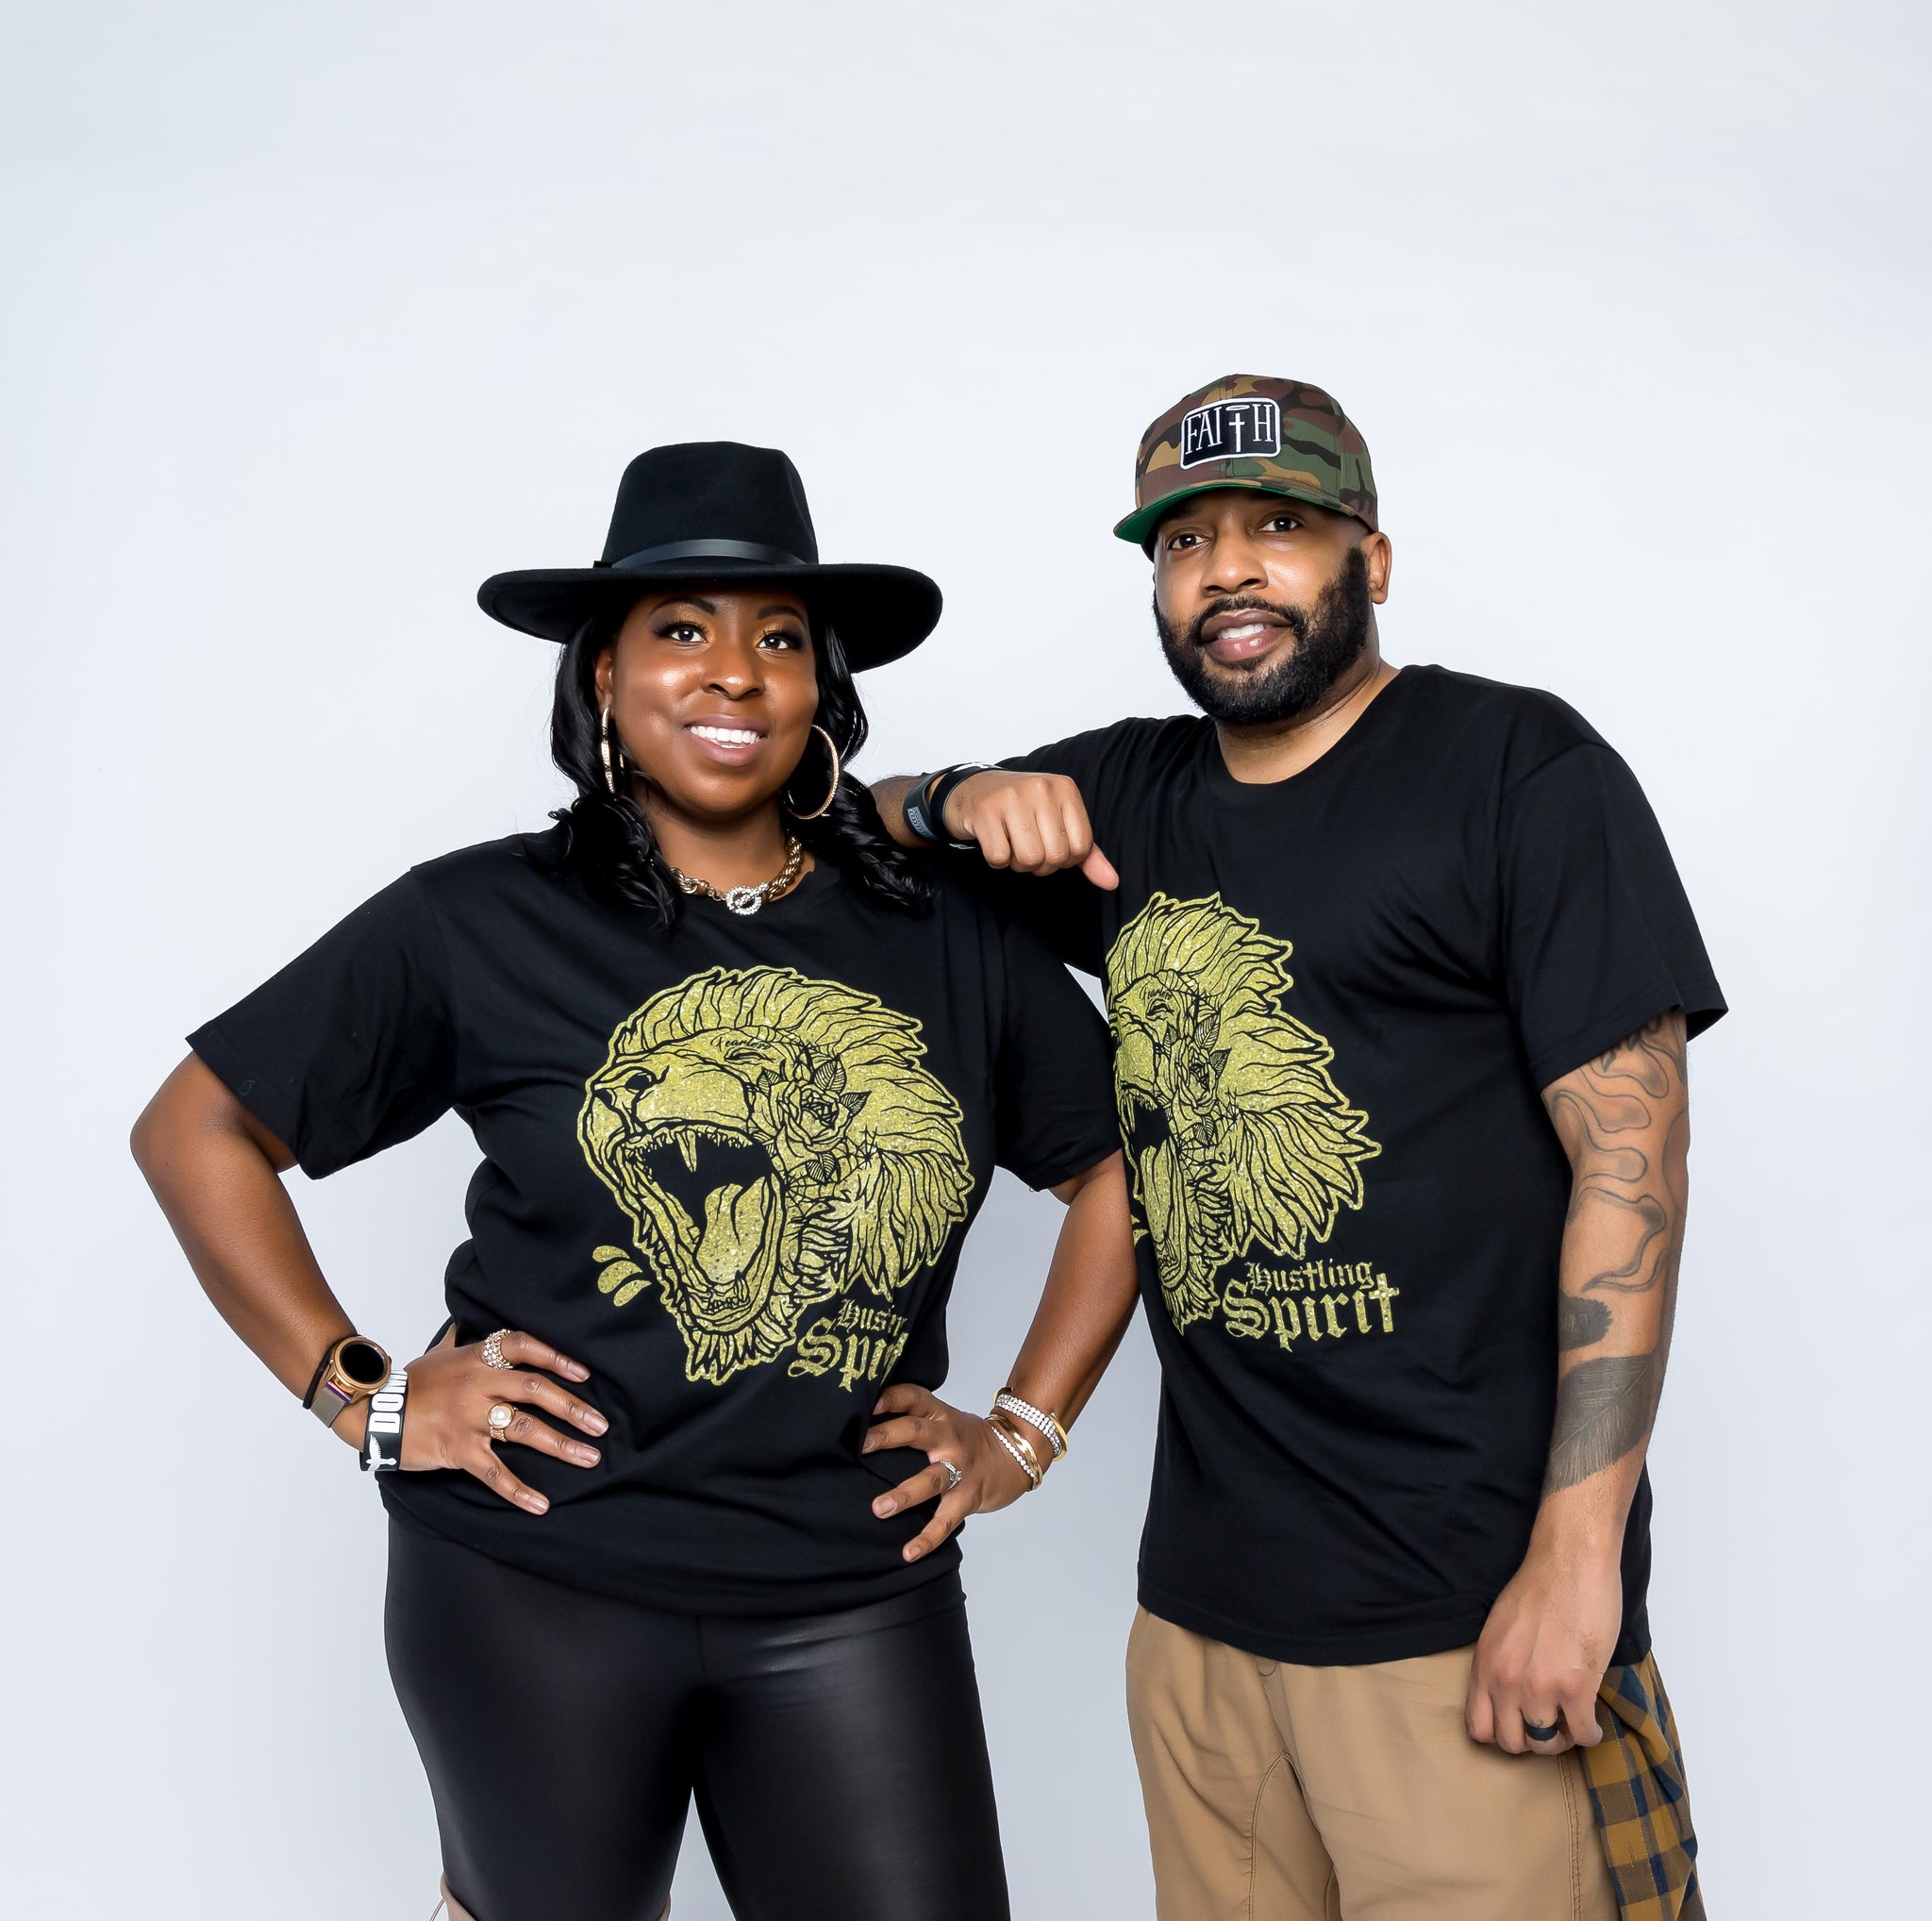 Fearless Lion Gold Shine Tee (Unisex)